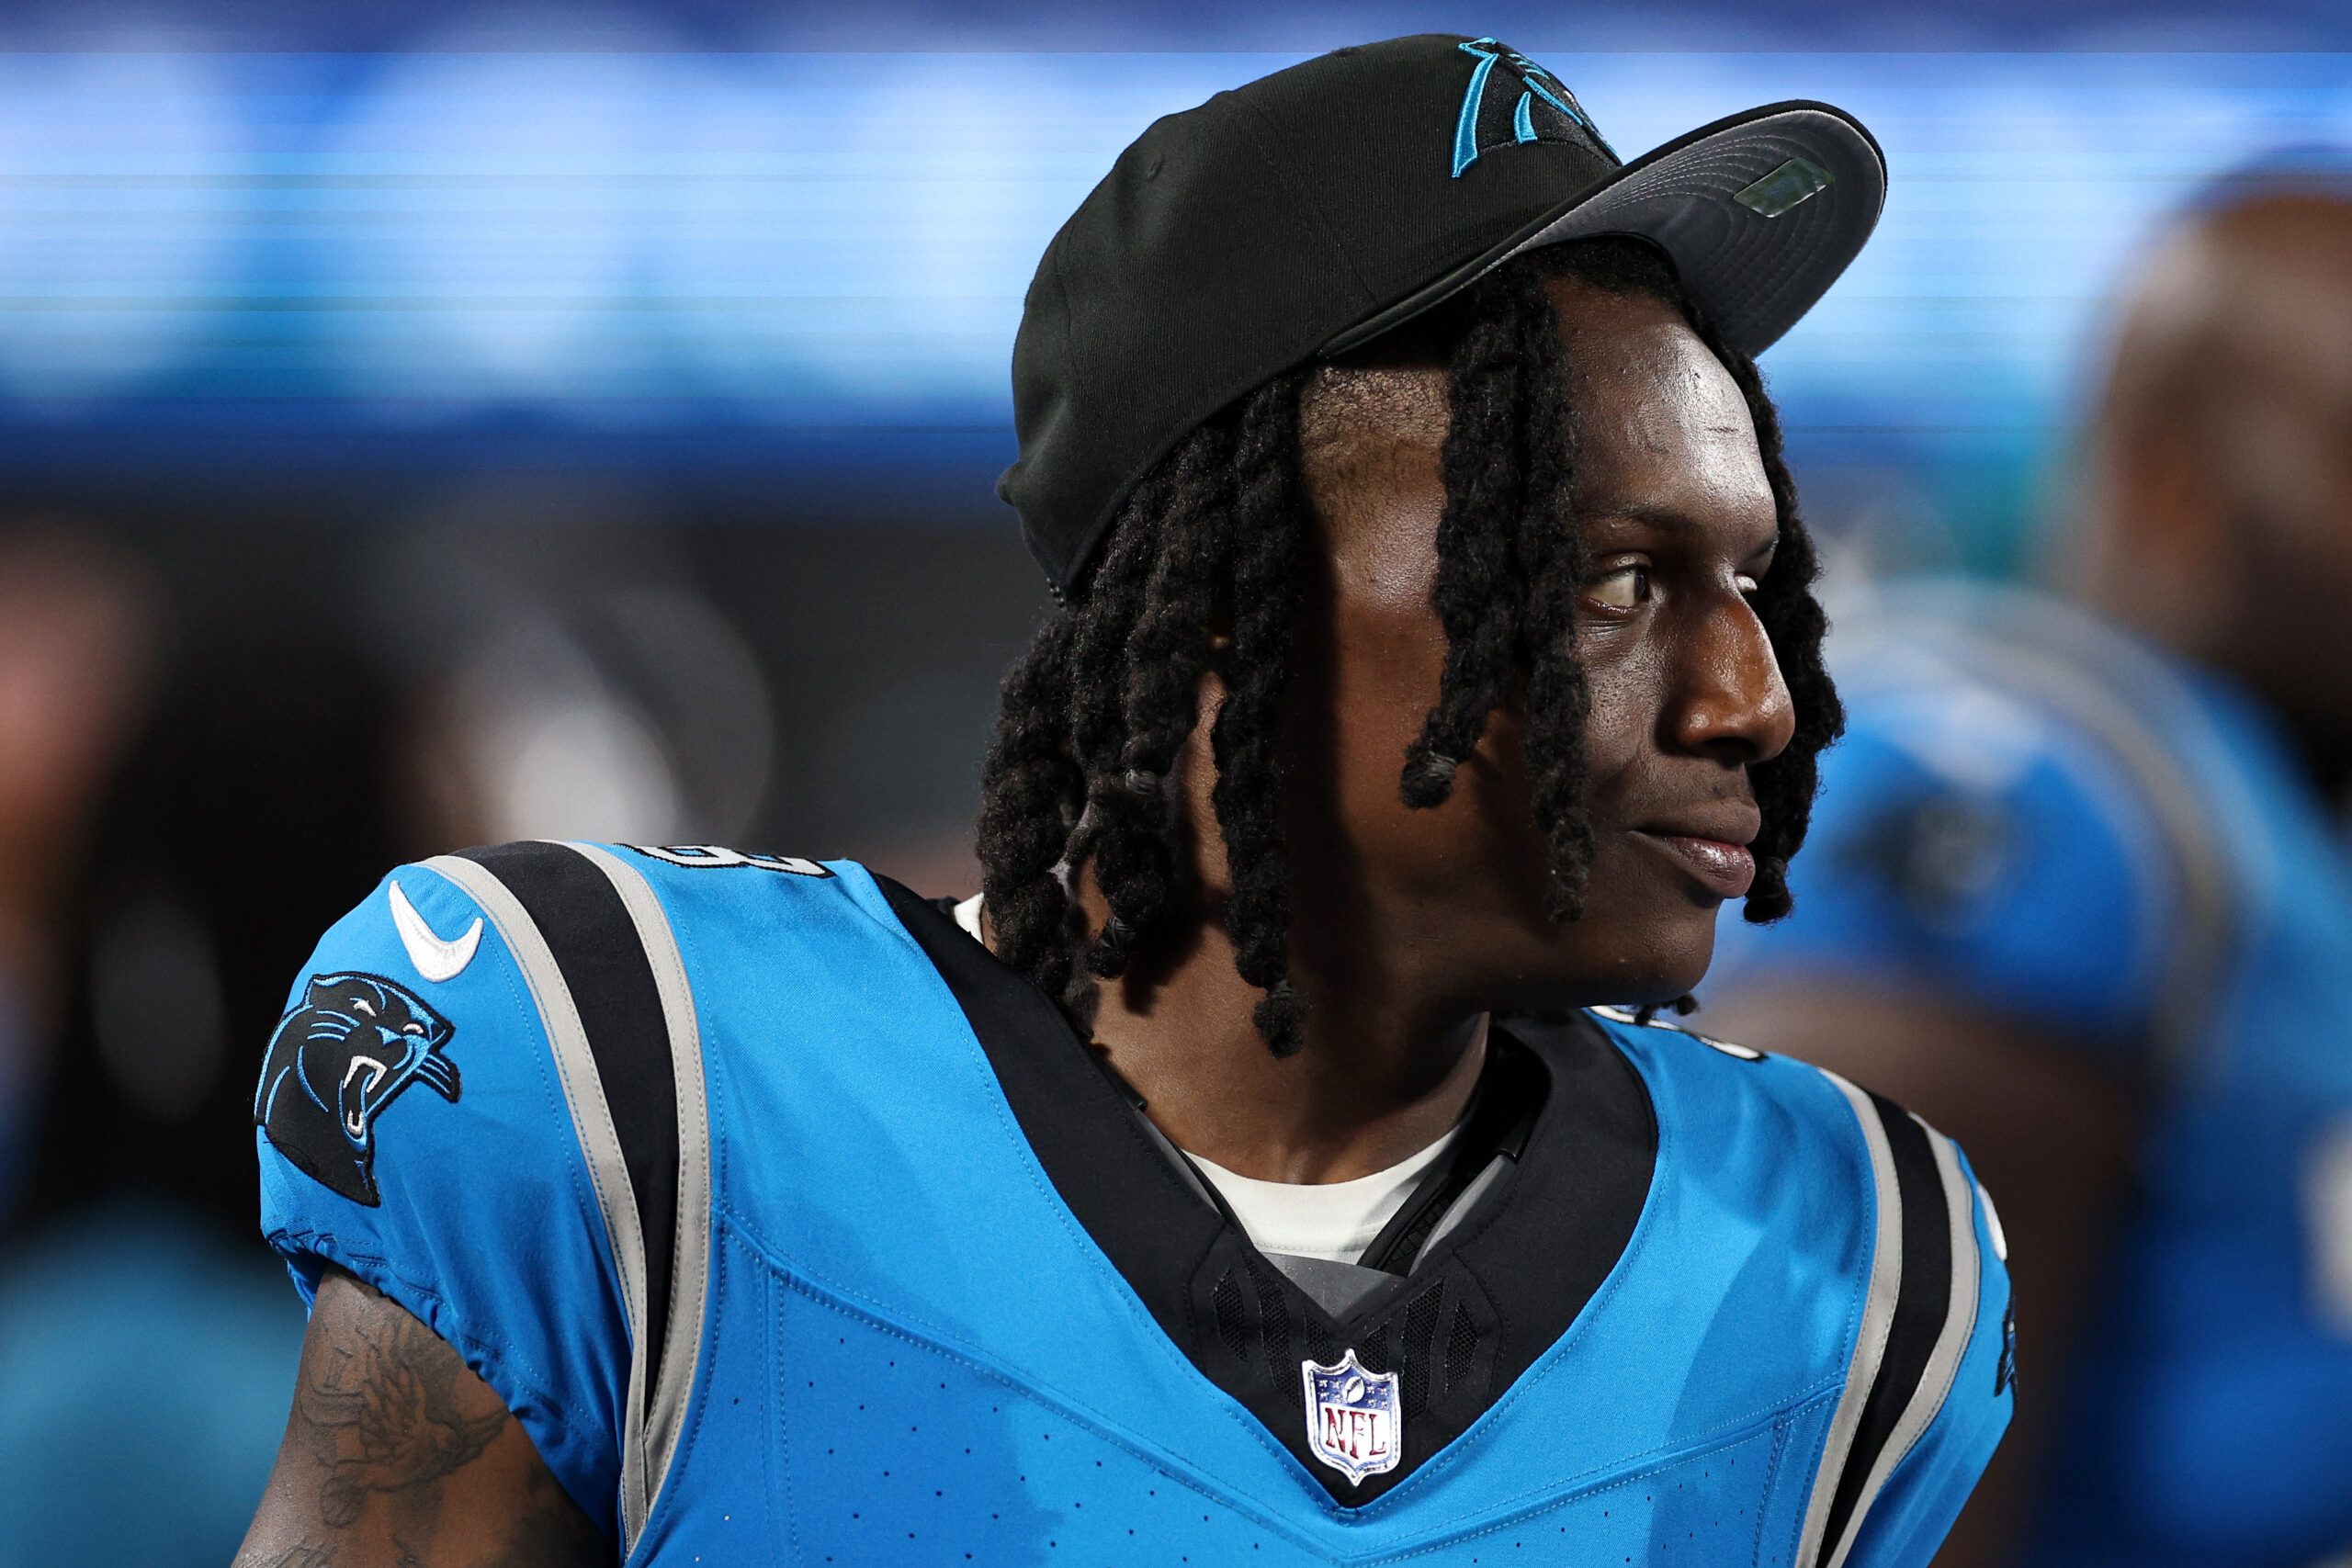 Carolina Panthers Jaycee Horn To Miss Multiple Weeks + Panthers CB